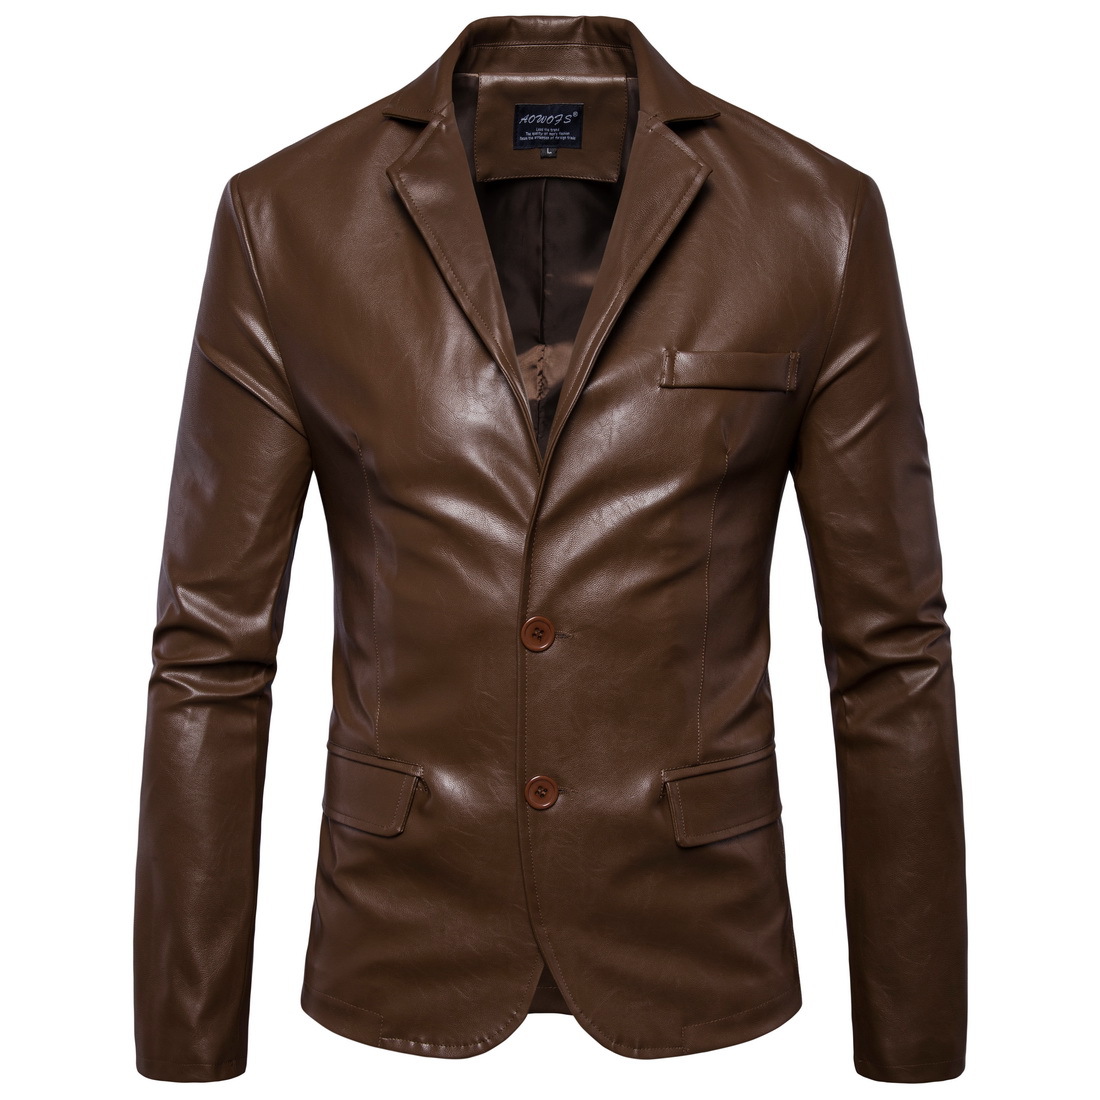 Men's Outerwear Coats Leather Leather Autumn New Men's Flip Collar Slim Fit Leather Coat Large Men's Leather Suit European and American Style PU Leather Coat